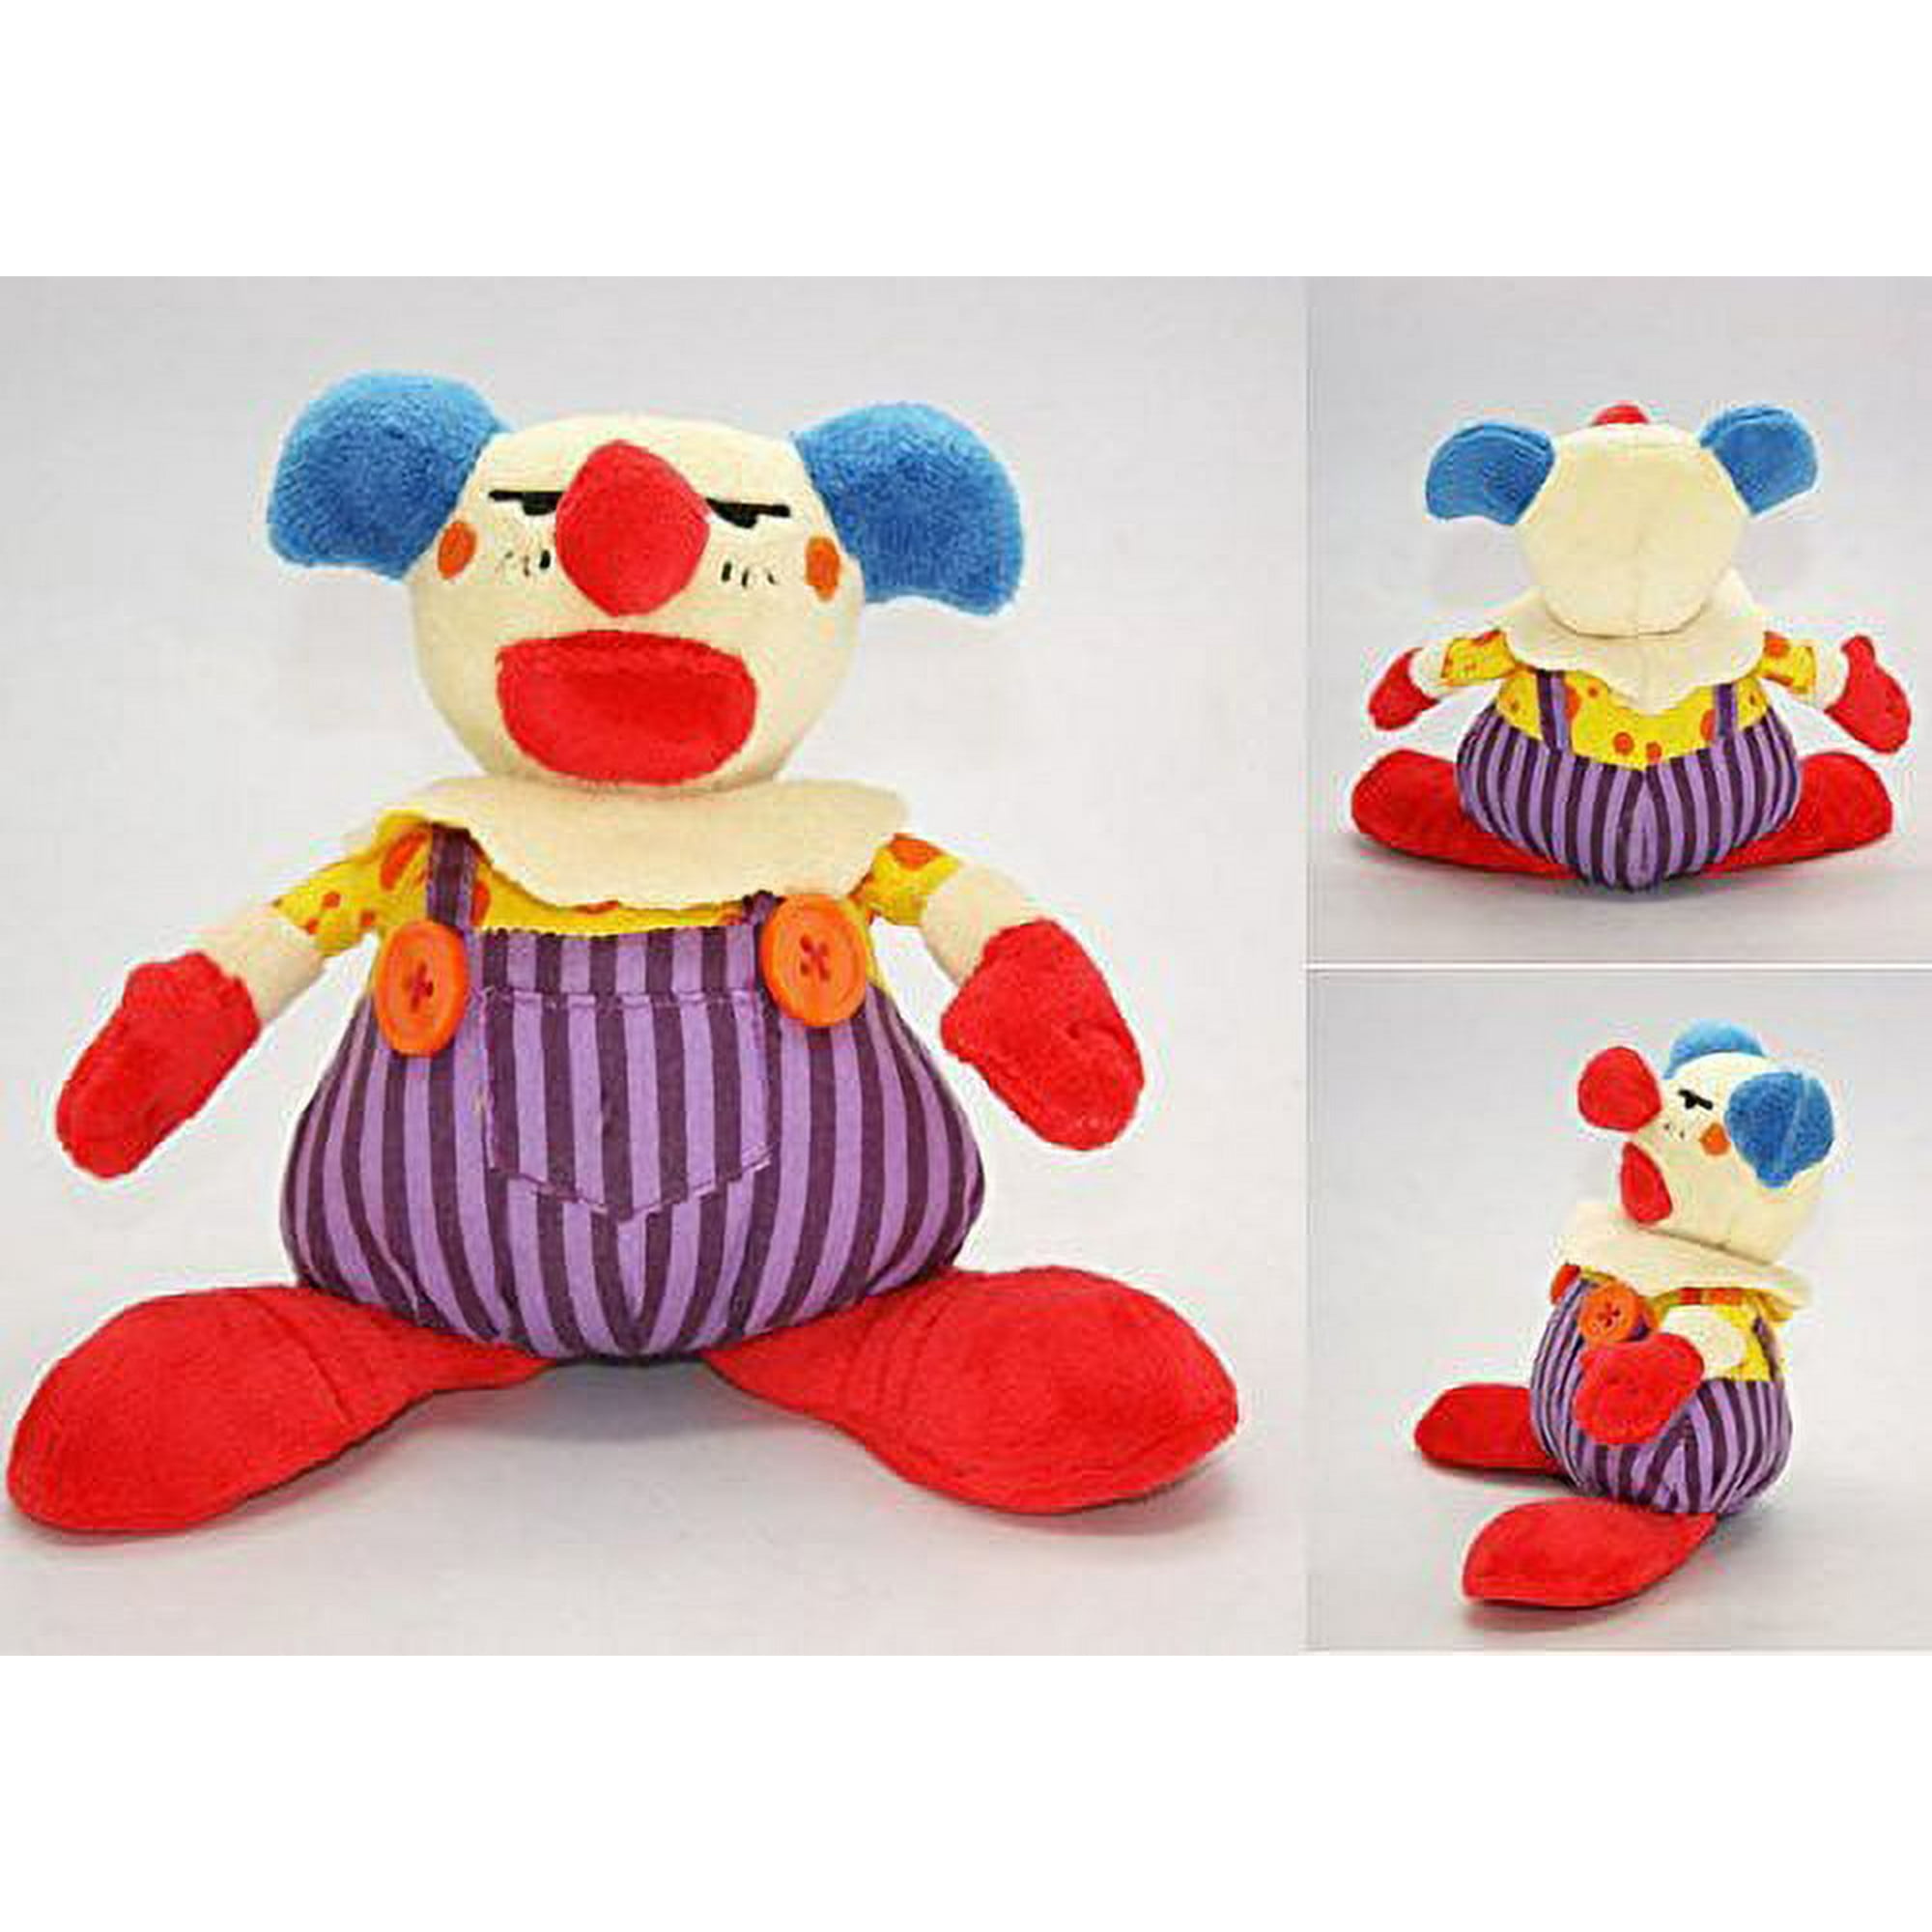 chuckles the clown toy story 3